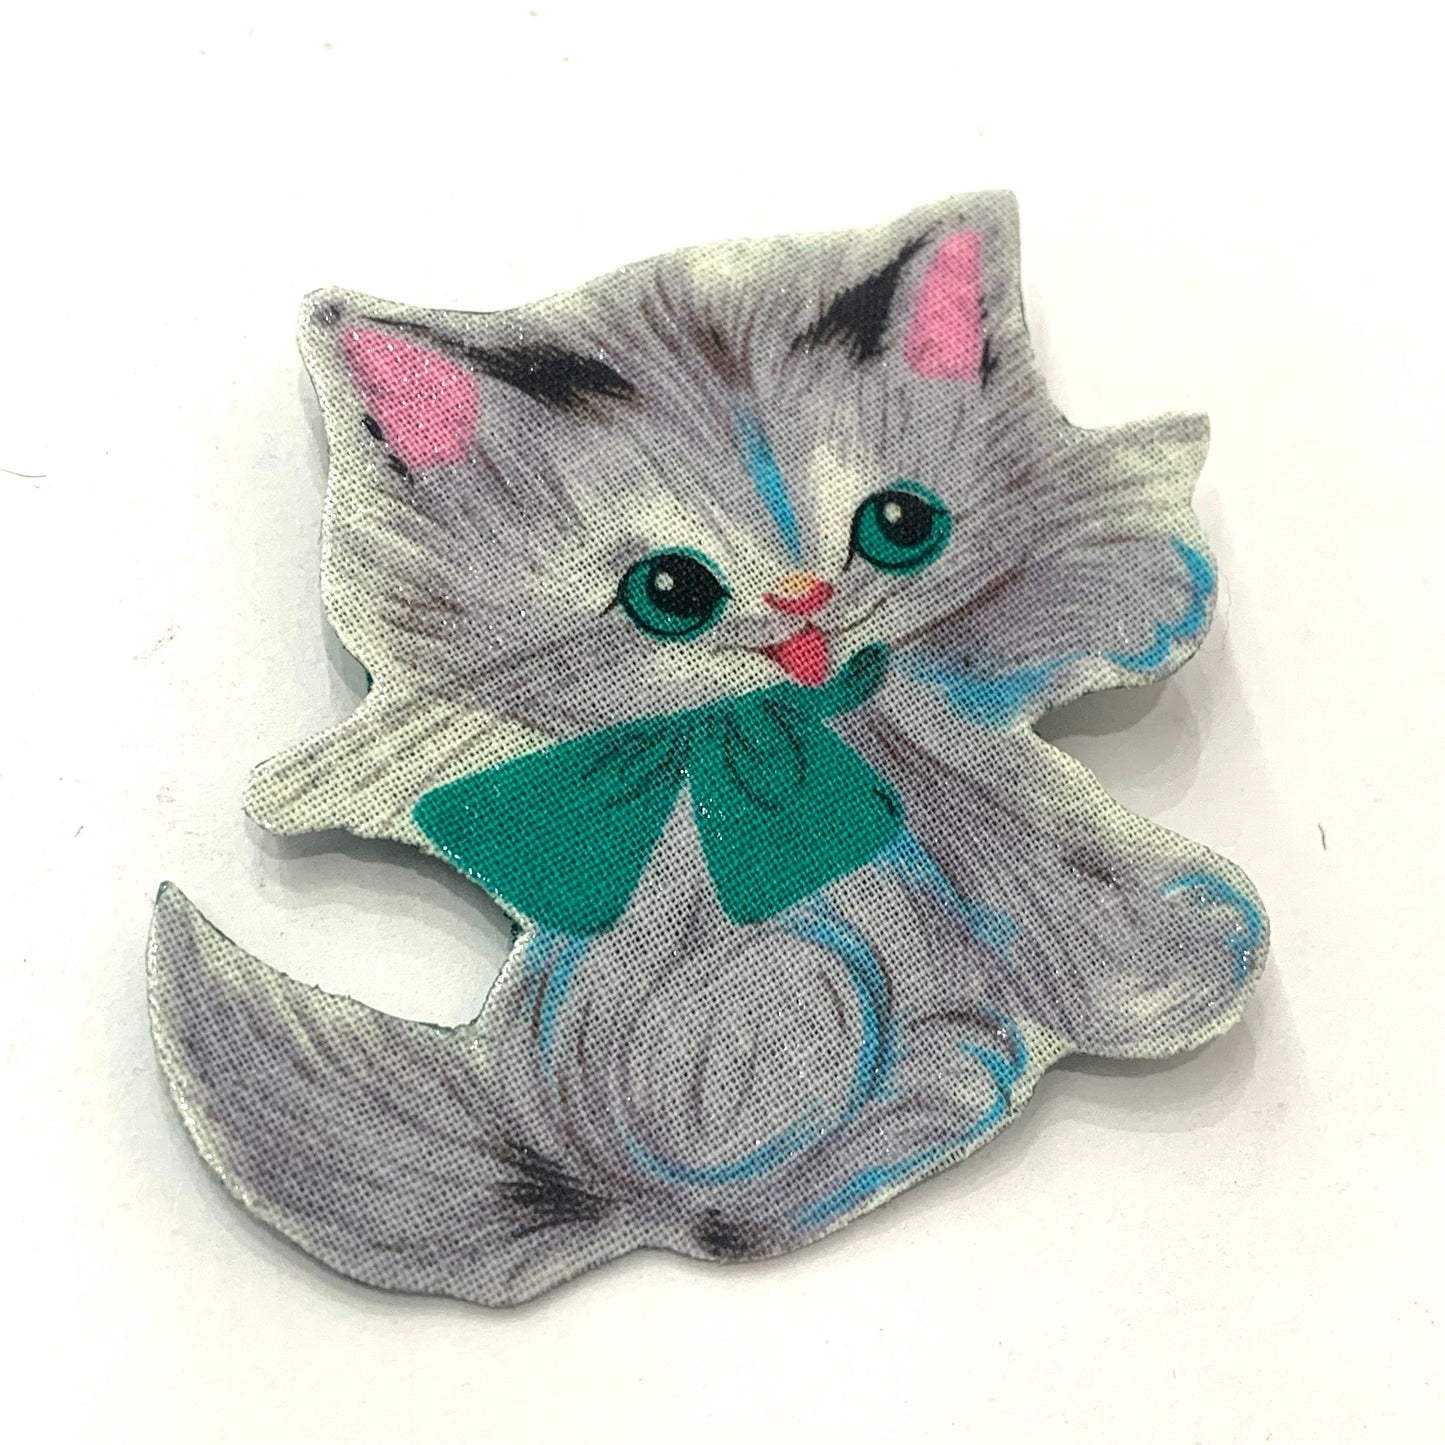 THIS BIRD HAS FLOWN- Fabric Remnant Brooches- Sitting Pretty Kitty